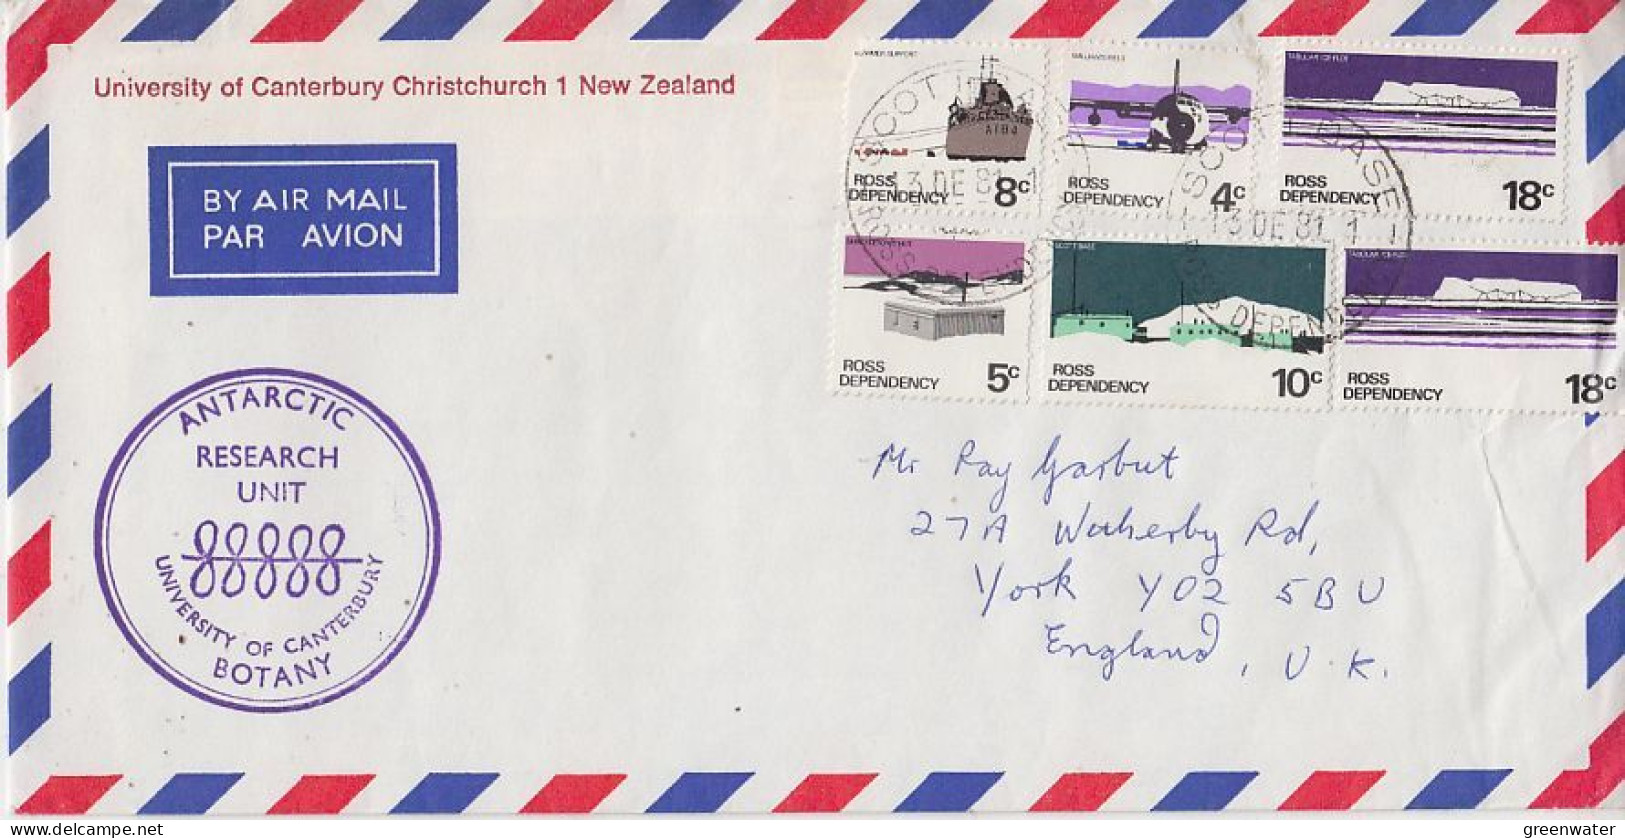 Ross Dependency University Of Canterbury Cover + Letter (Cape Bird) Ca Scott Base 13 DEC 1981 (RO209) - Covers & Documents